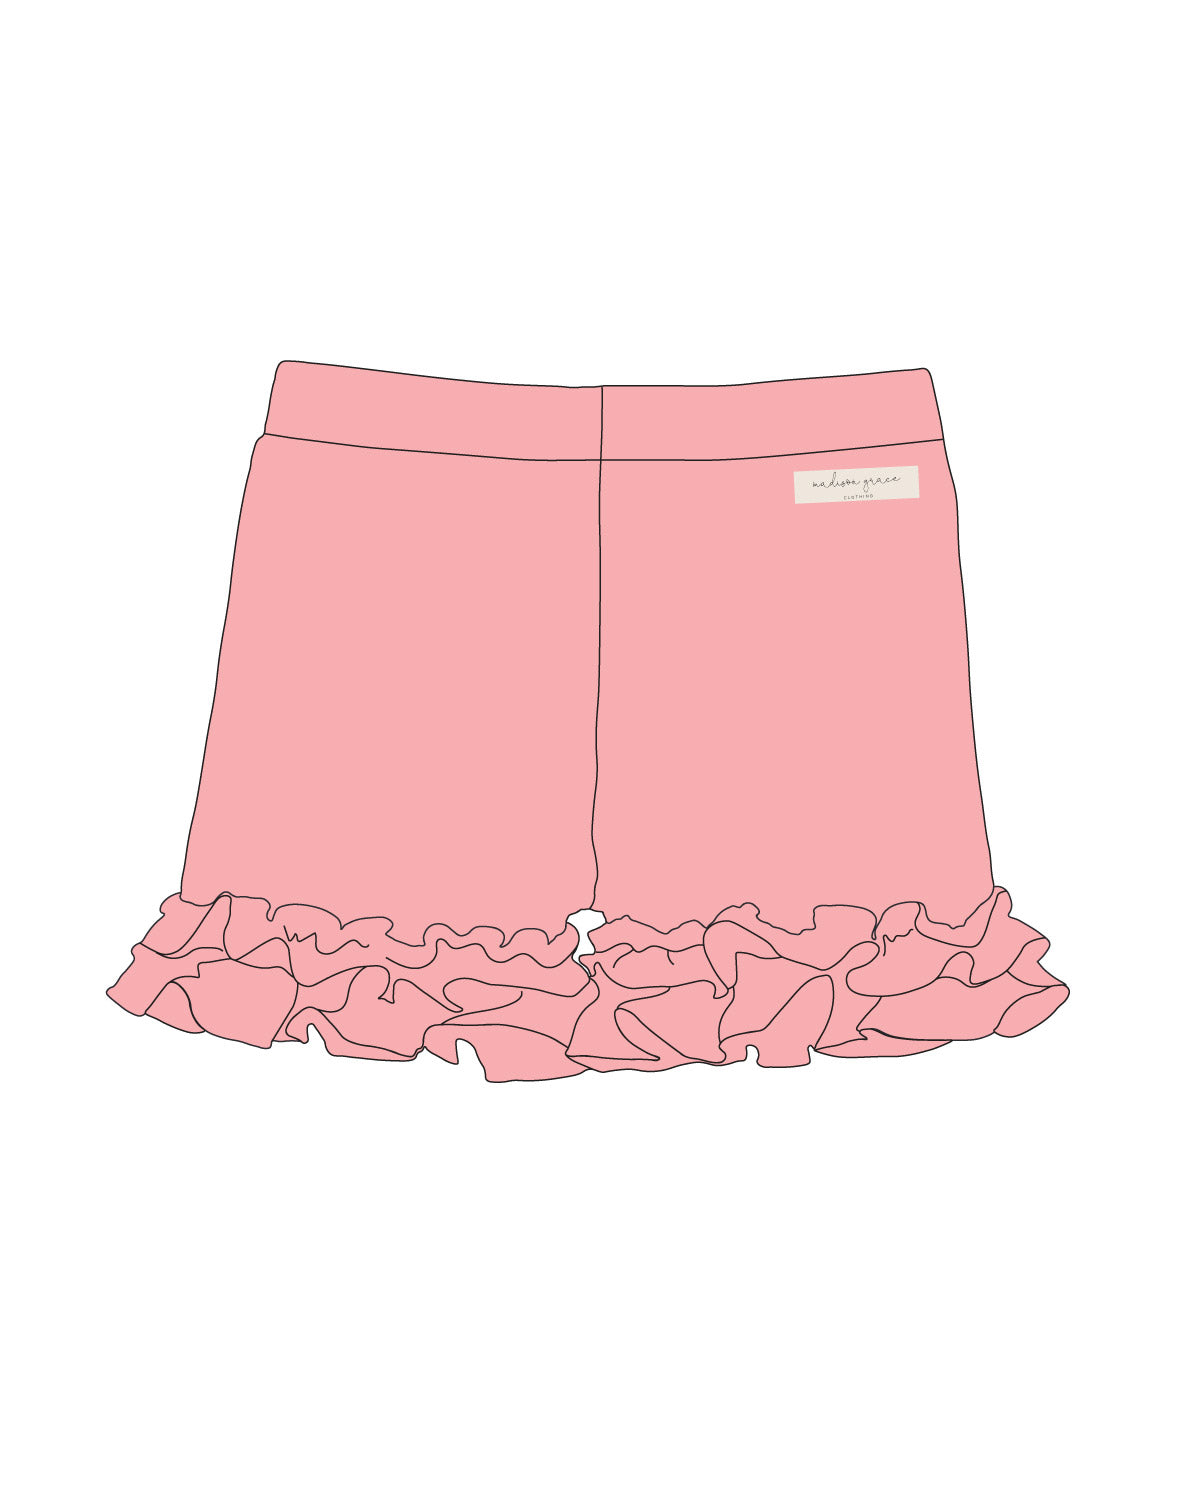 Ruffle Shorties - Pink Coral - Love Millie Clothing